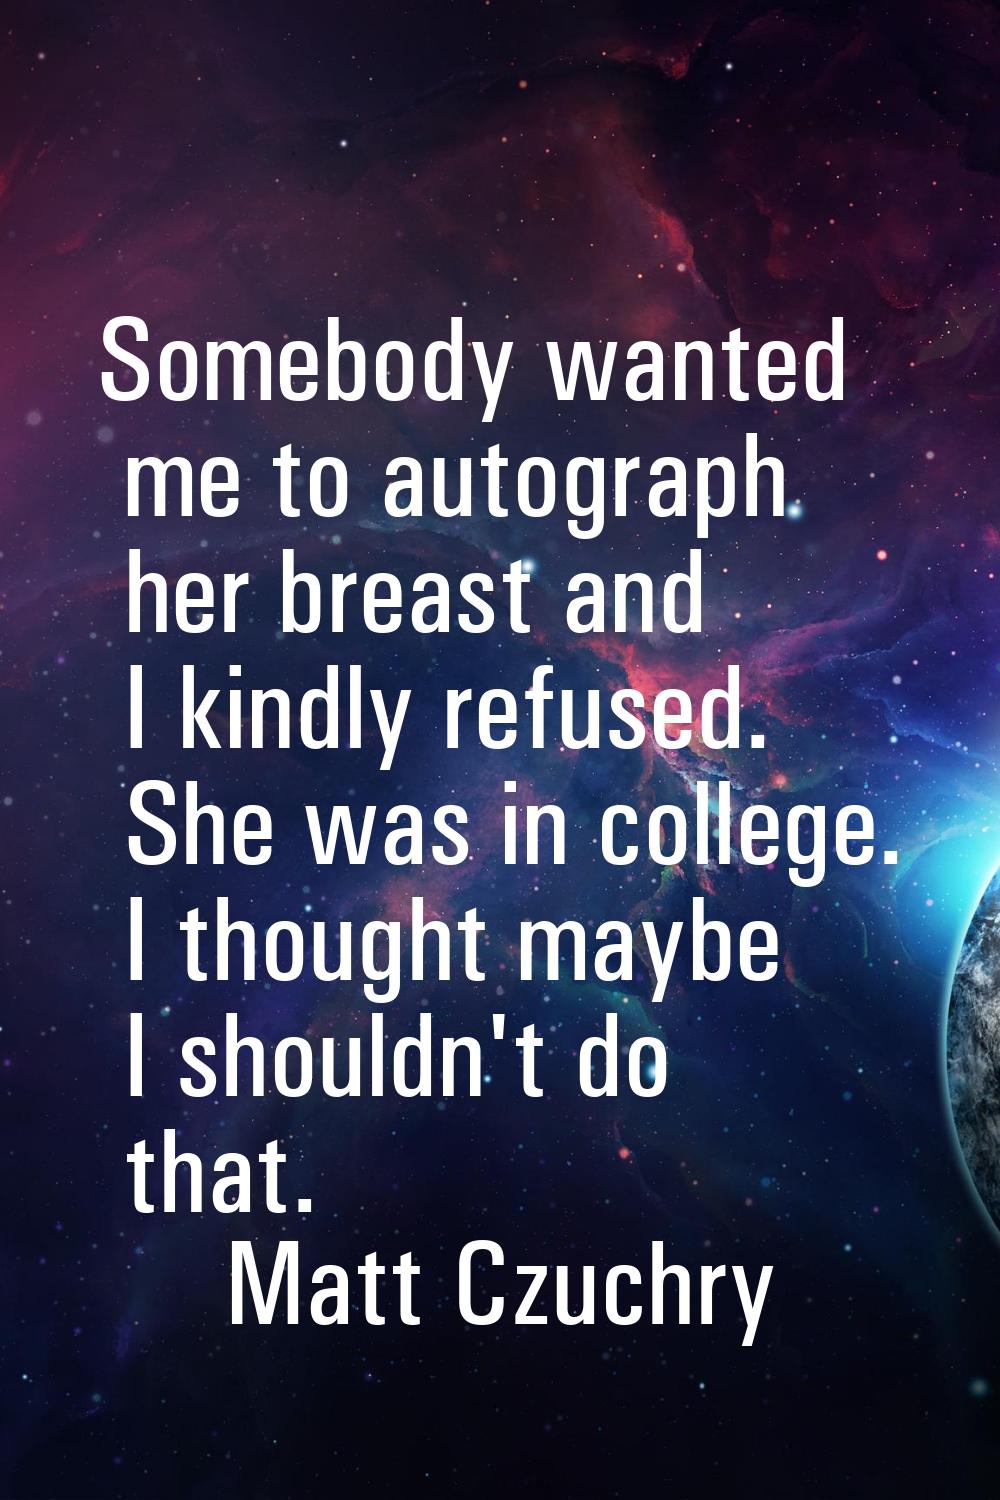 Somebody wanted me to autograph her breast and I kindly refused. She was in college. I thought mayb